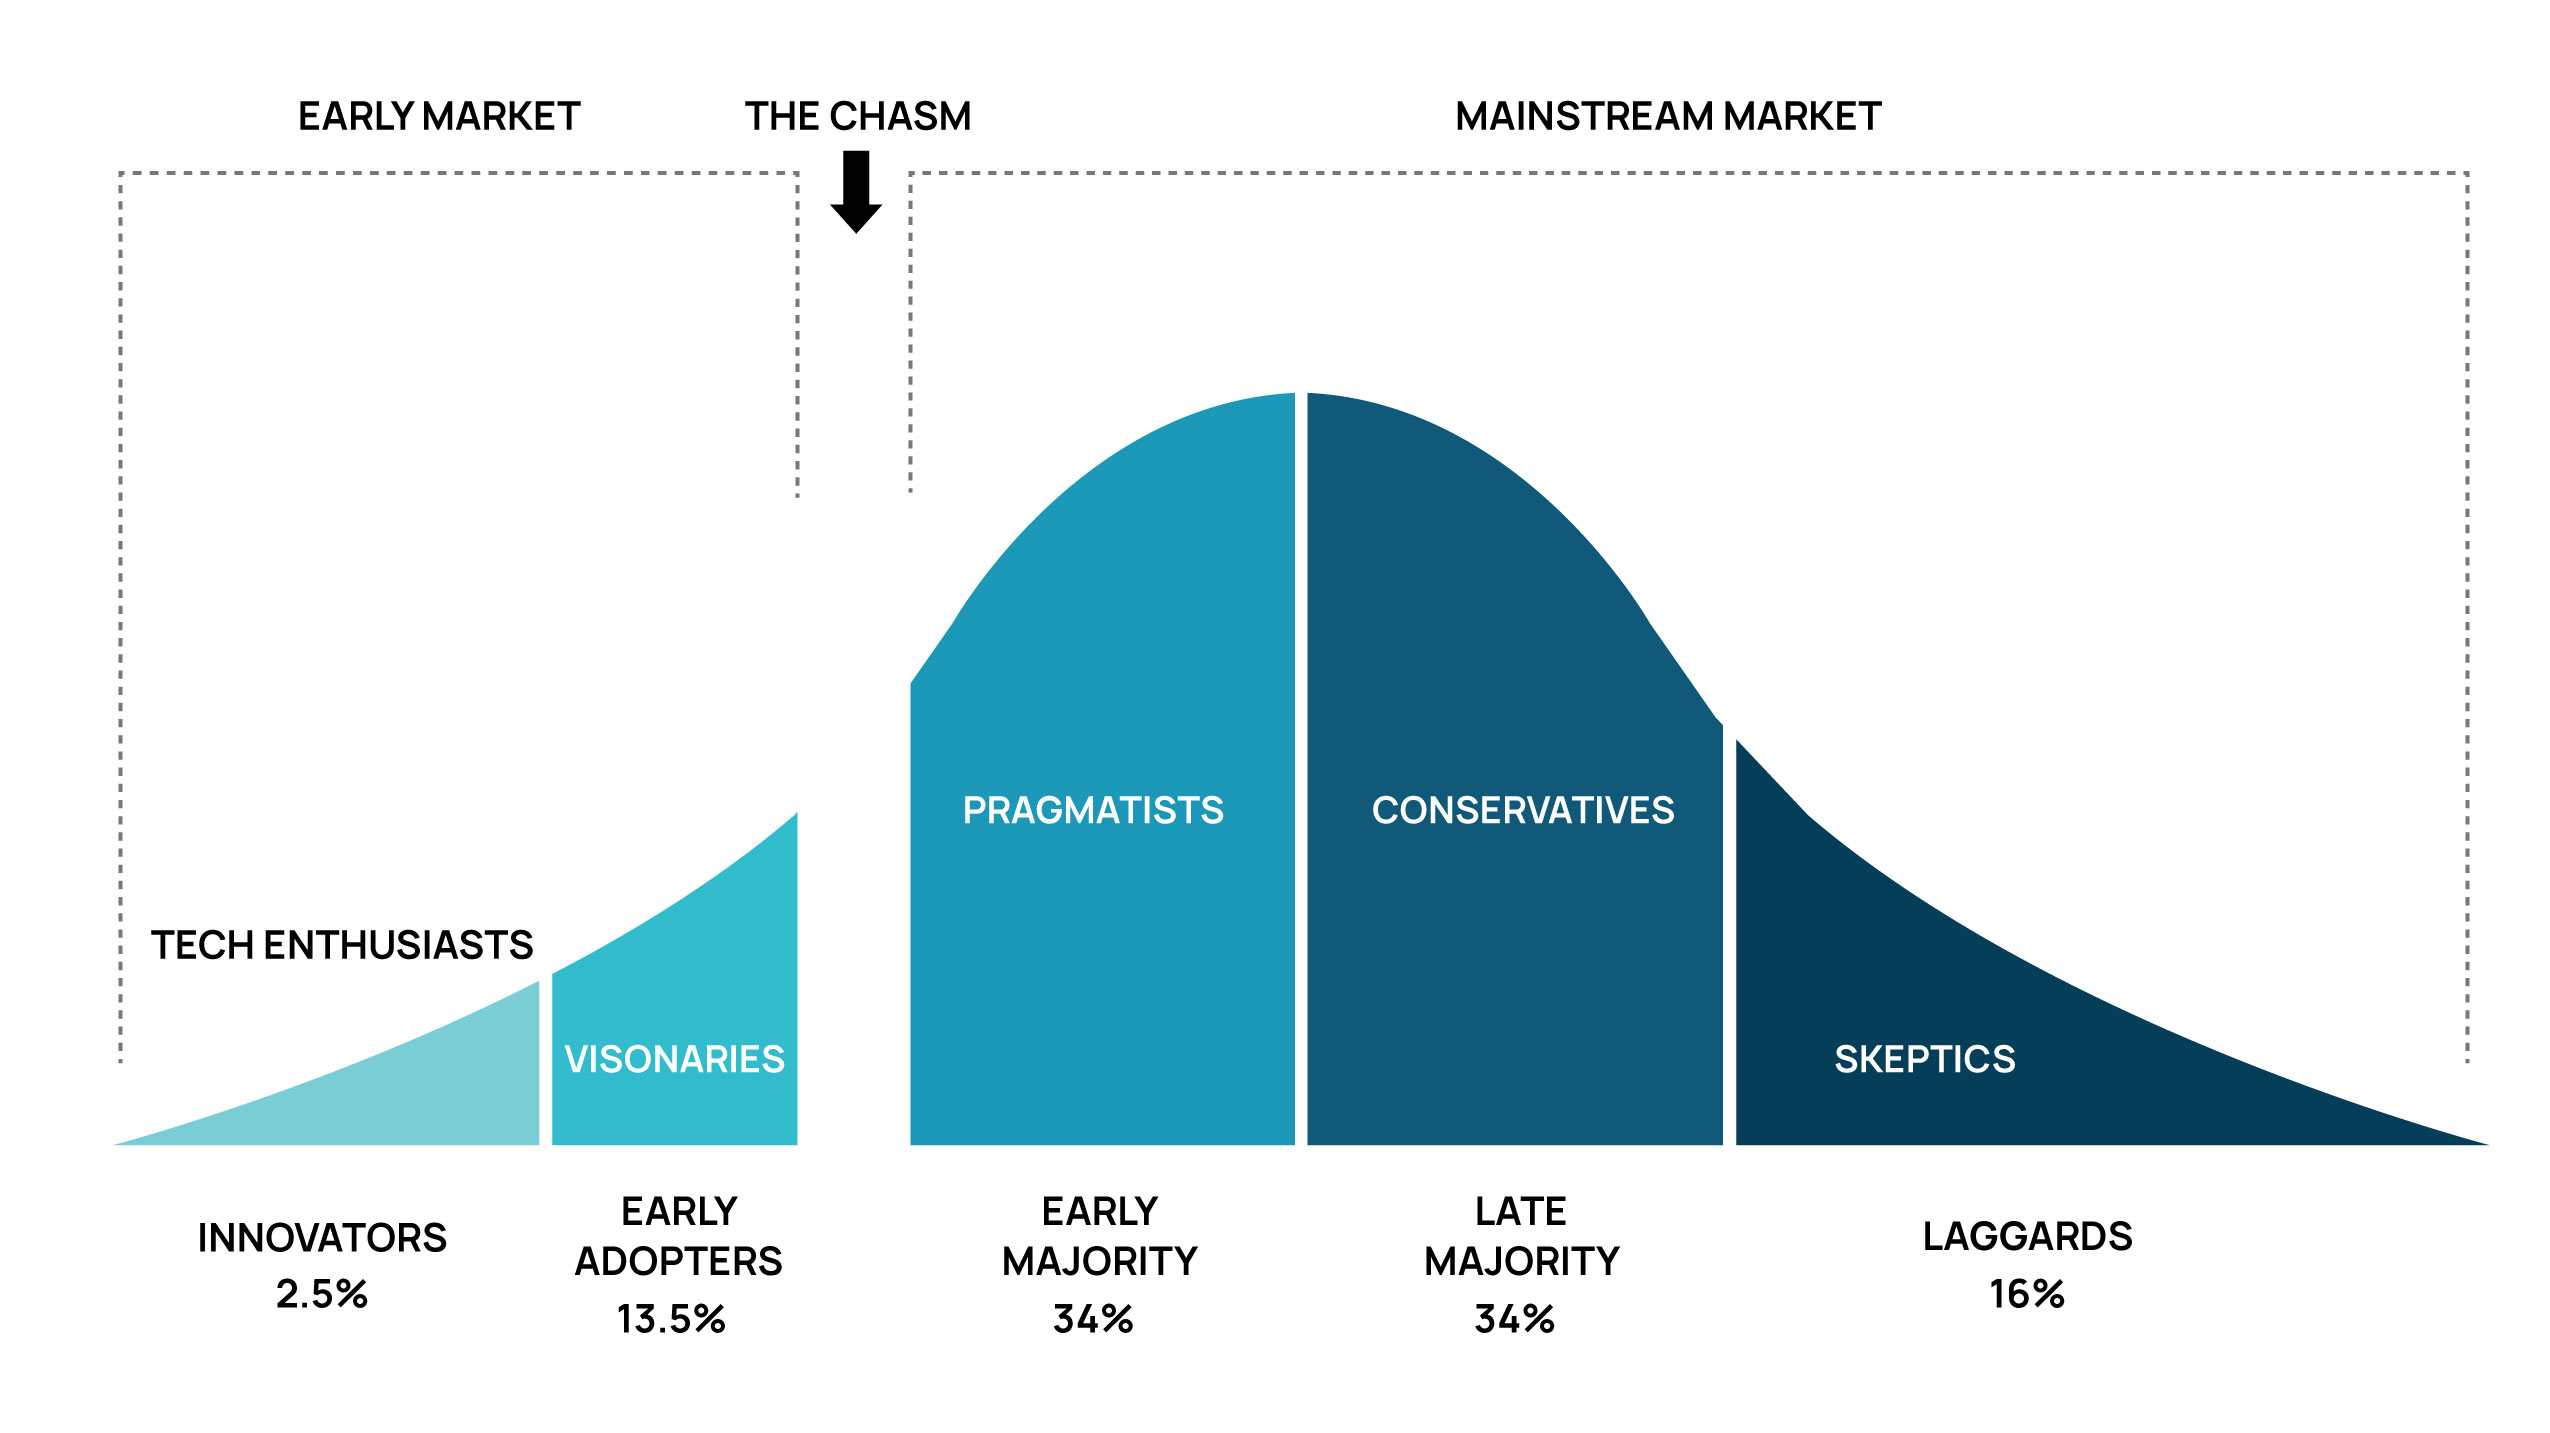 This adoption curve graph illustrates the "chasm" between the early market and the mainstream market of any tech innovation. The early market is comprised of innovators (tech enthusiasts) at 2.5% of the total eventual user market, as well as early adopters (visionaries) at 13.5%. The mainstream market includes the early majority (pragmatists) at 34%, the late majority (conservatives)—also at 34%—and finally the laggards (skeptics) at 16%. Since Threads has yet to jump the chasm to engage the early majority of the mainstream market, it may not yet be a pragmatic bet for law firms.